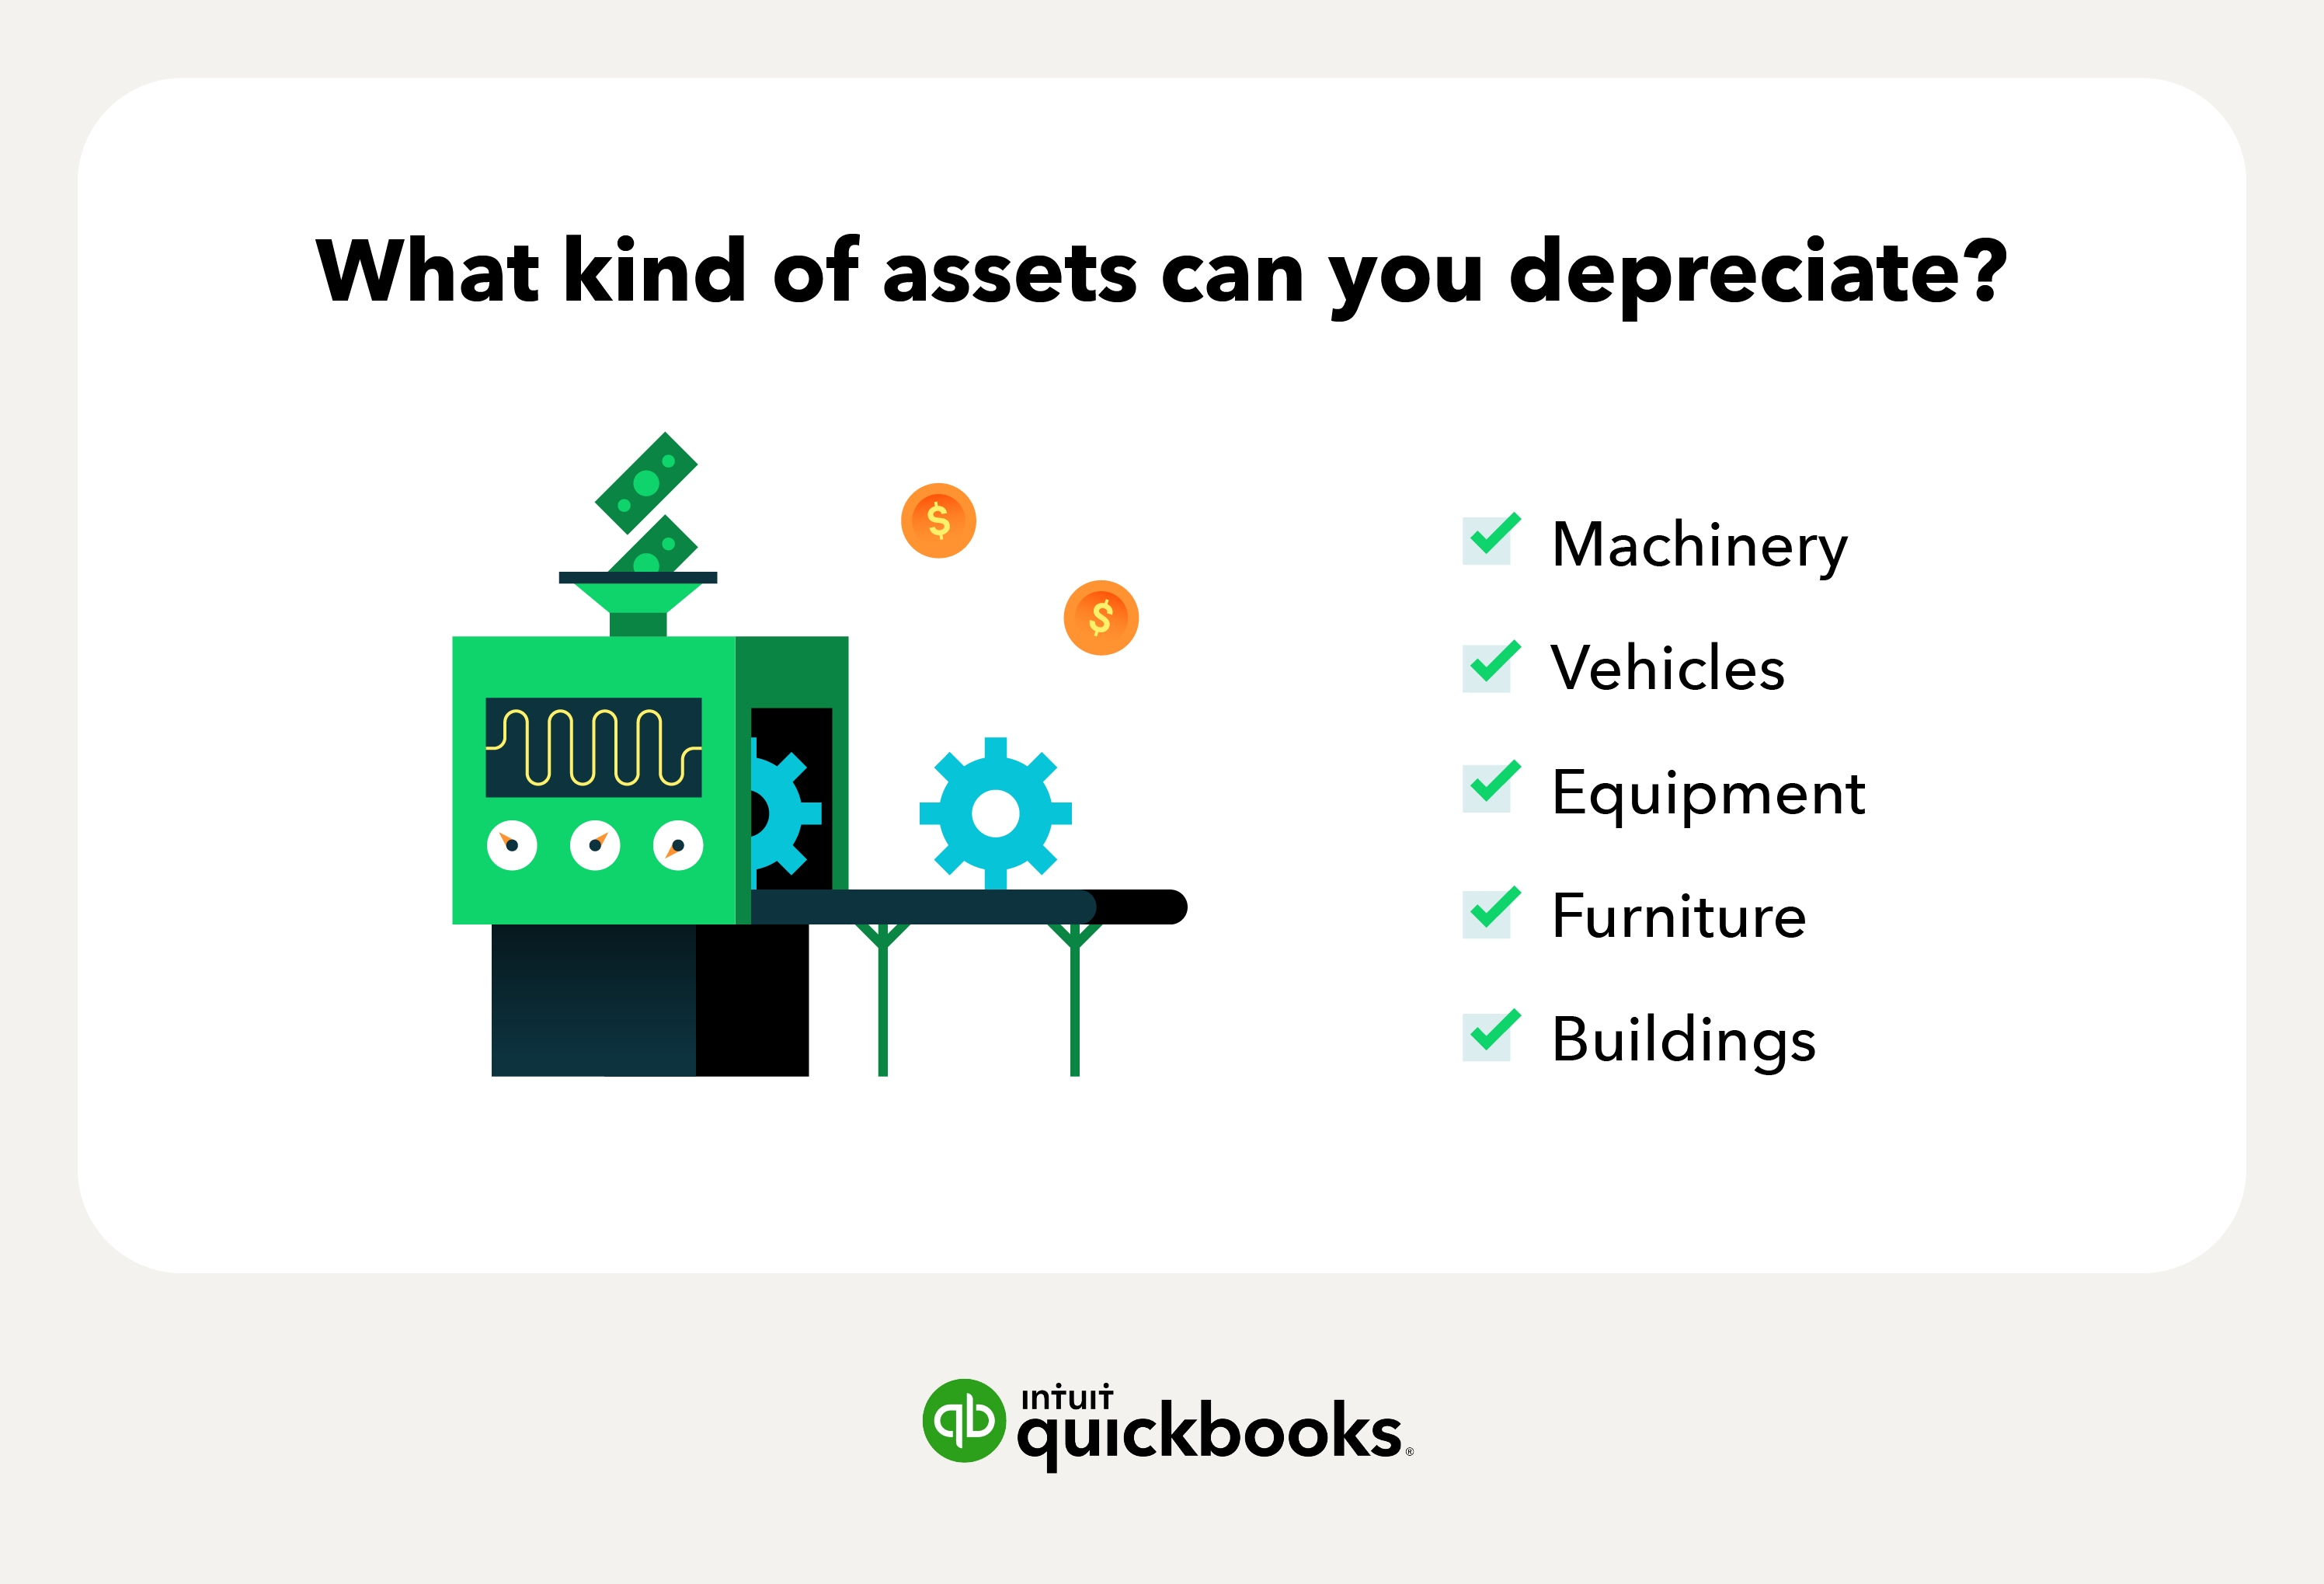 What kind of assets can you depreciate? Machinery, vehicles, equipment, furniture, buildings